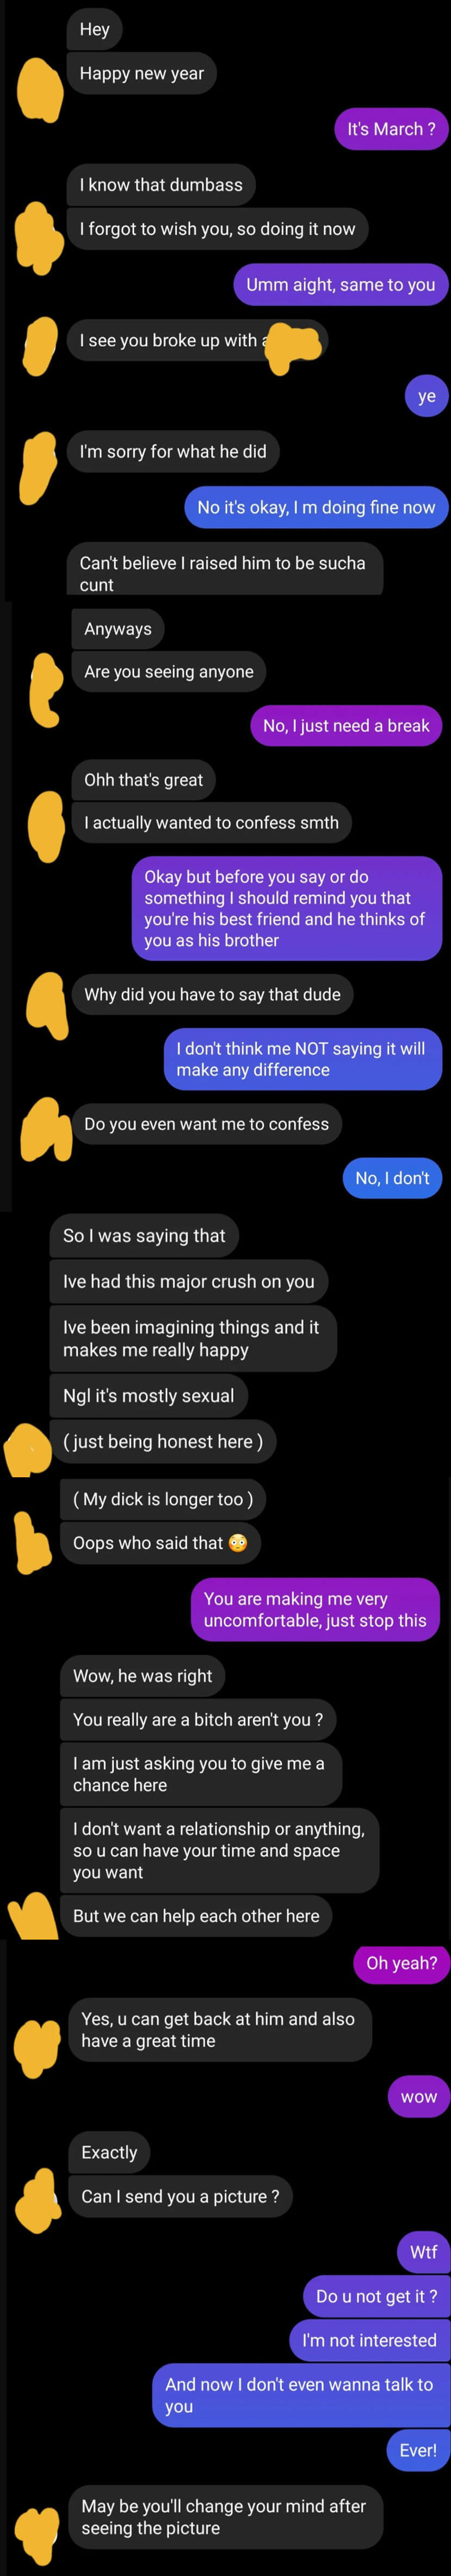 best friend of girl&#x27;s ex says he always had a crush on her and his dick is bigger than her ex&#x27;s, and she tells him she&#x27;s not interested and to leave her alone, but he keeps trying to send a picture